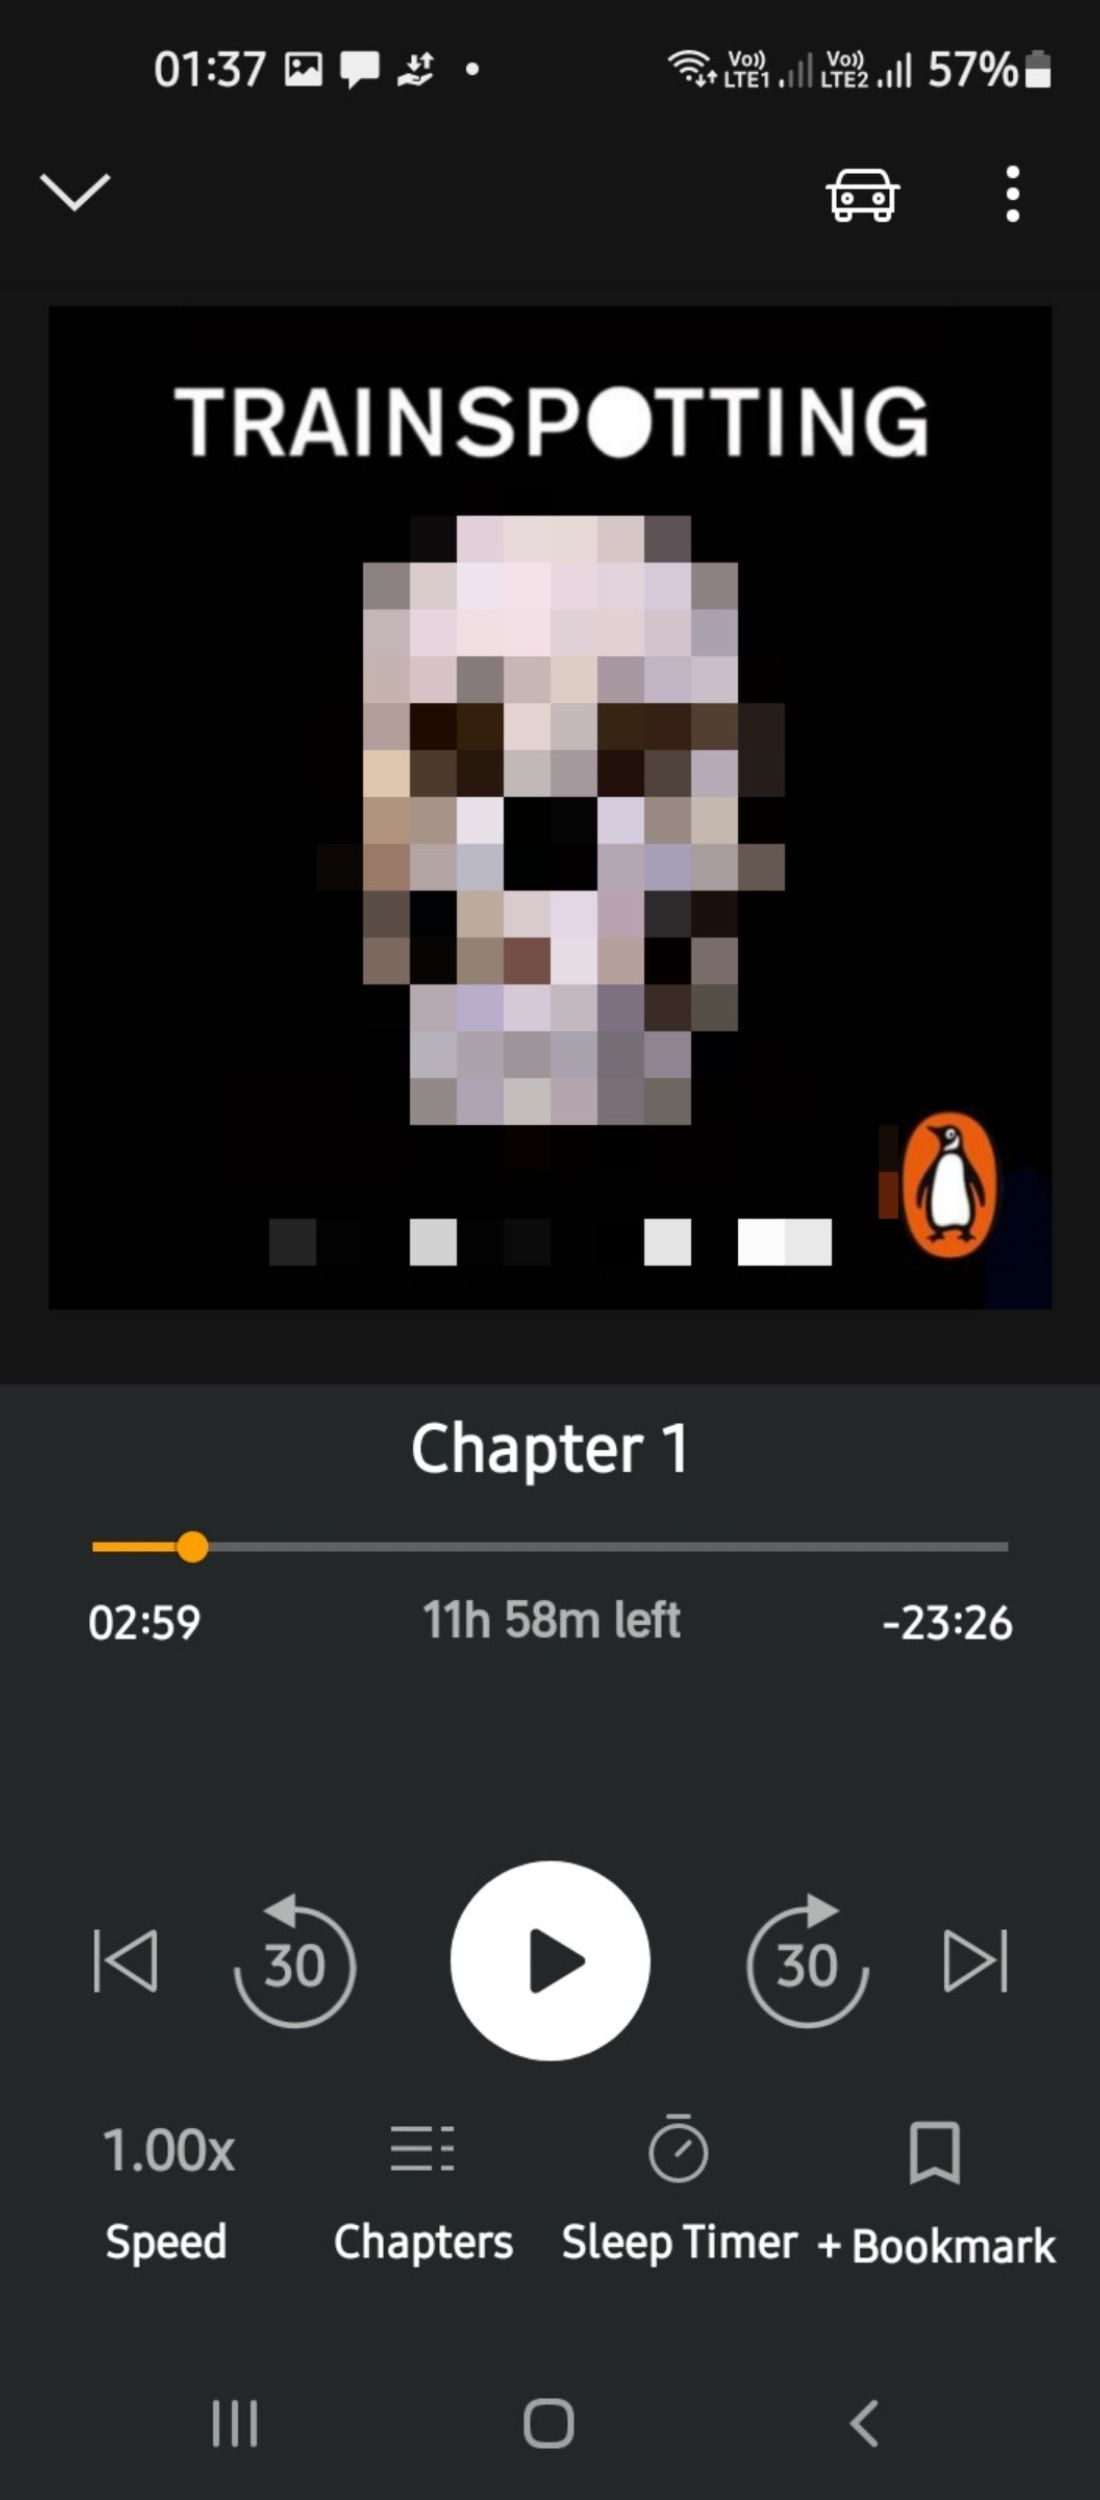 Playback controls and navigation in Audible app